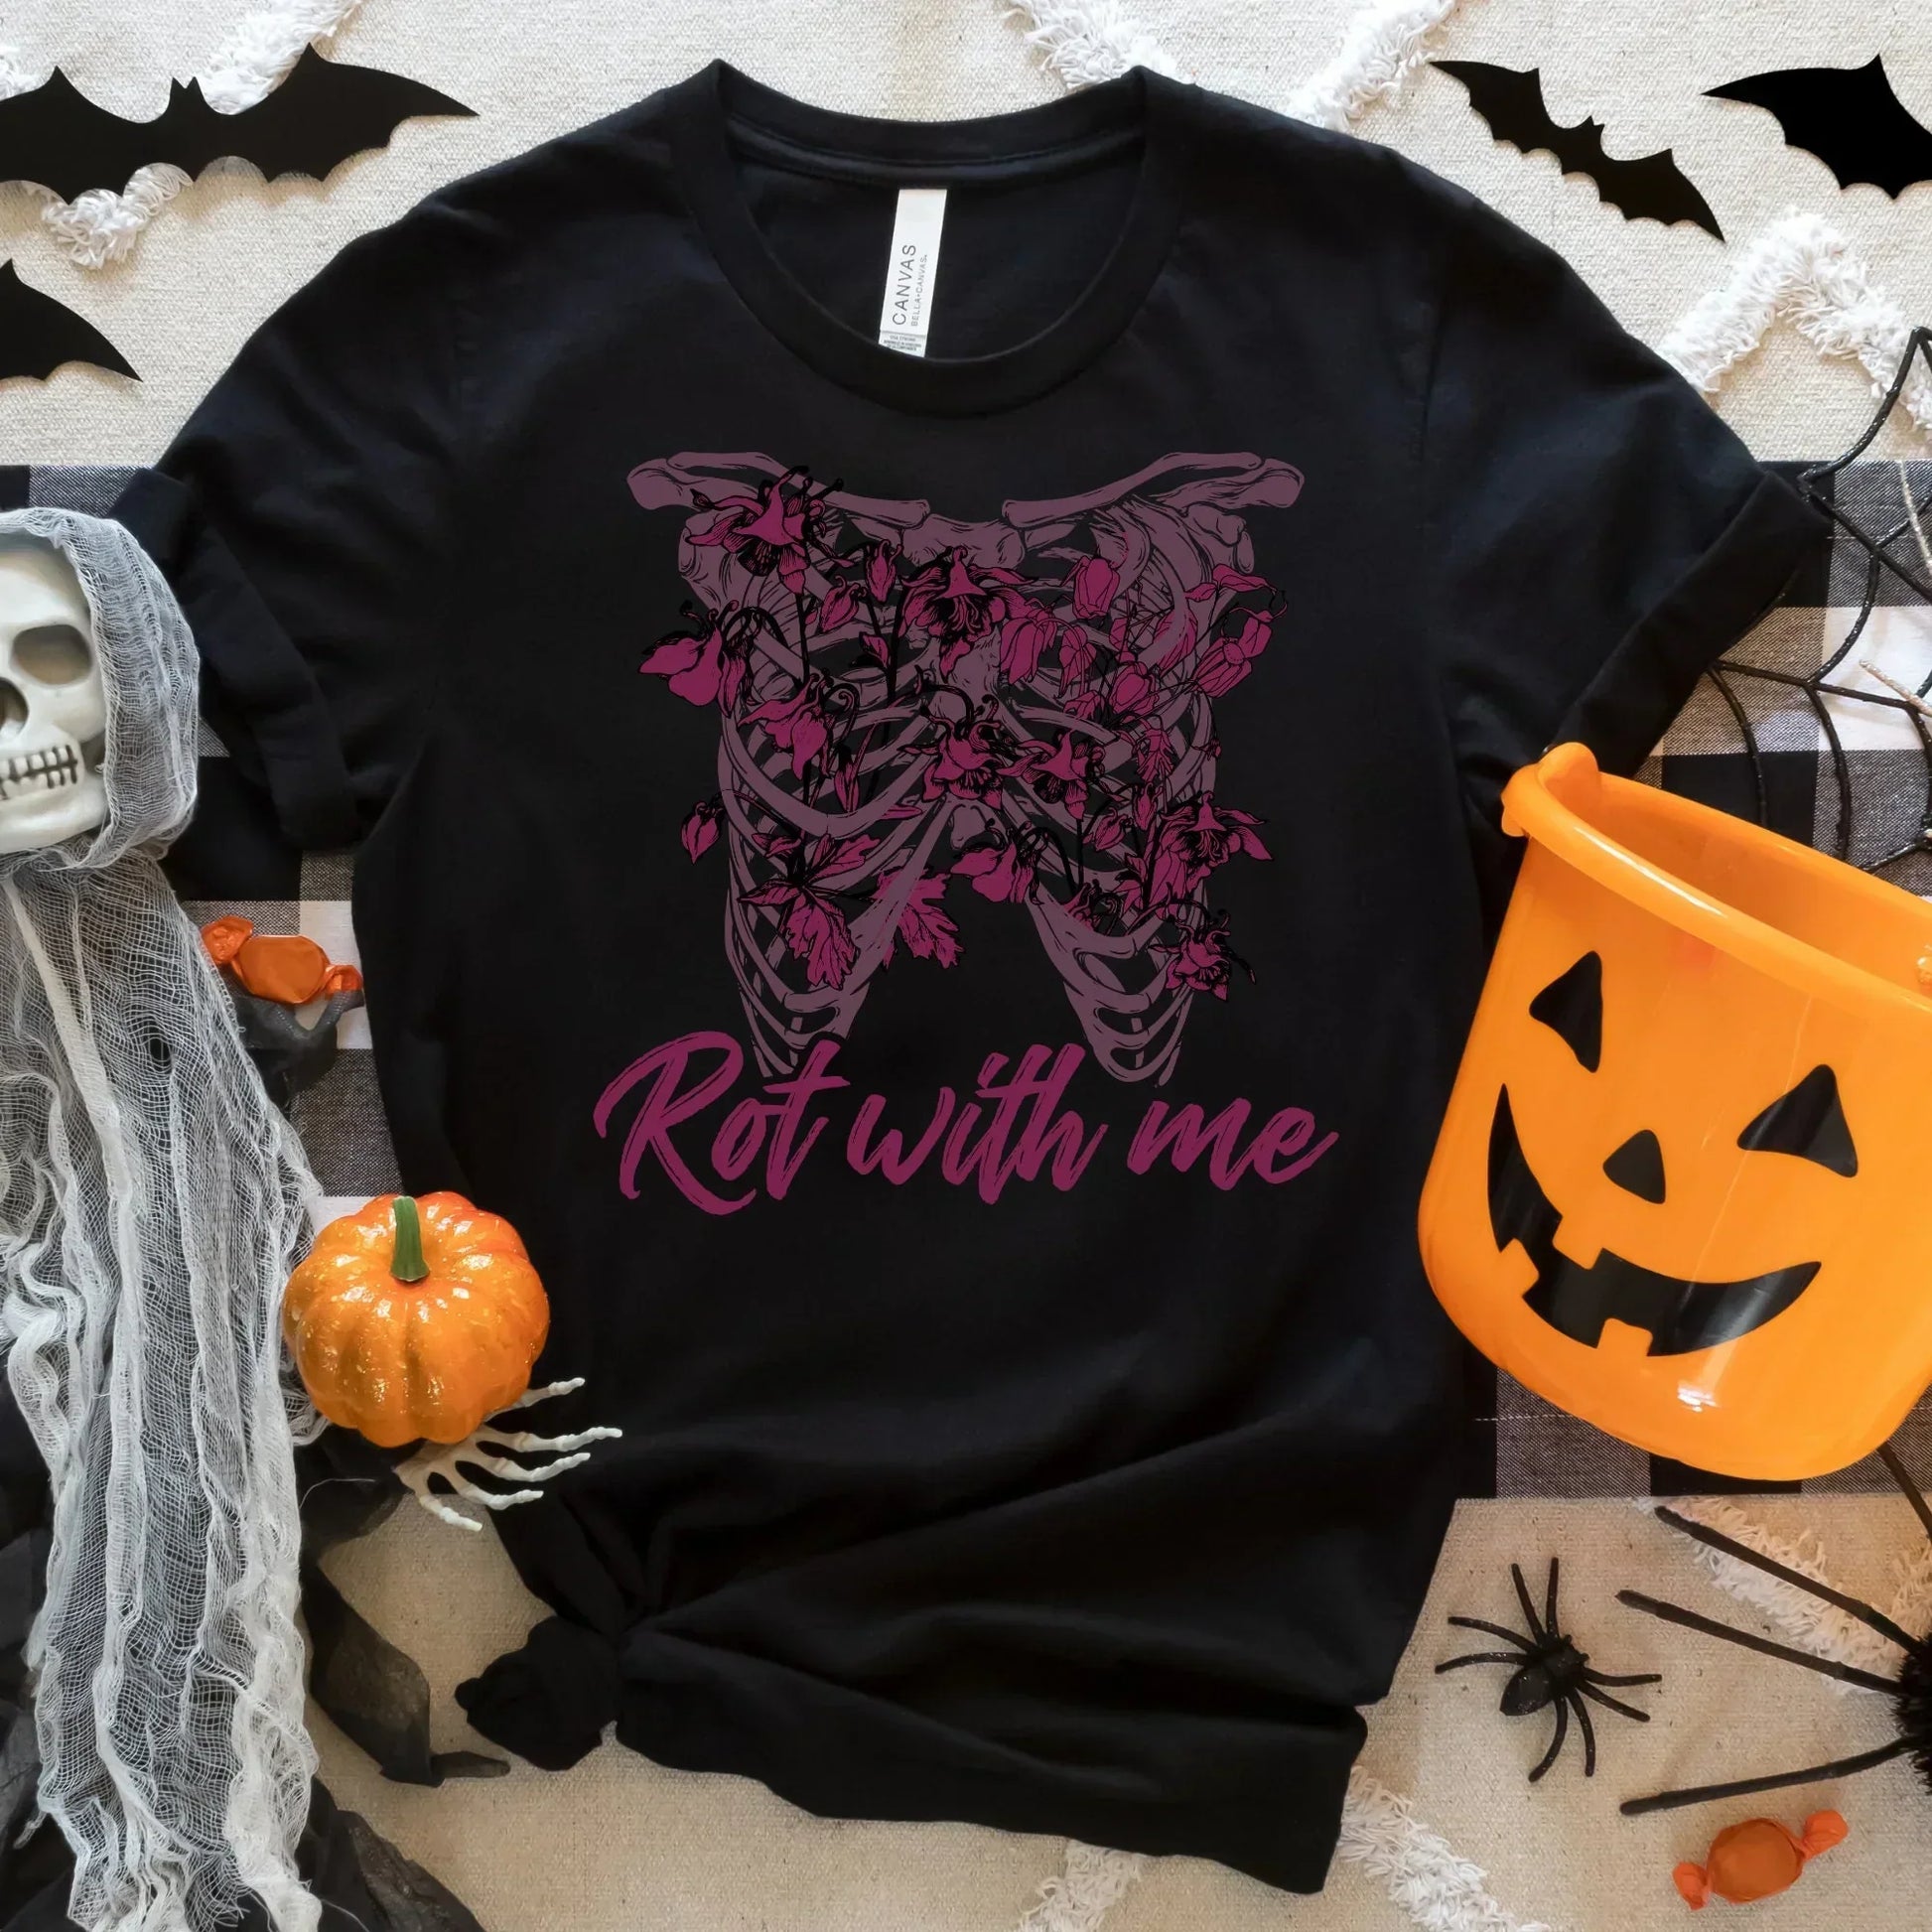 Gothic Shirt, Halloween Sweatshirt, Witchy Vibes, Bats & Dead Roses Shirt, Moon Shirt, Magical Witch Shirt, Goth Style, Rot with Me, EMO Tee HMDesignStudioUS